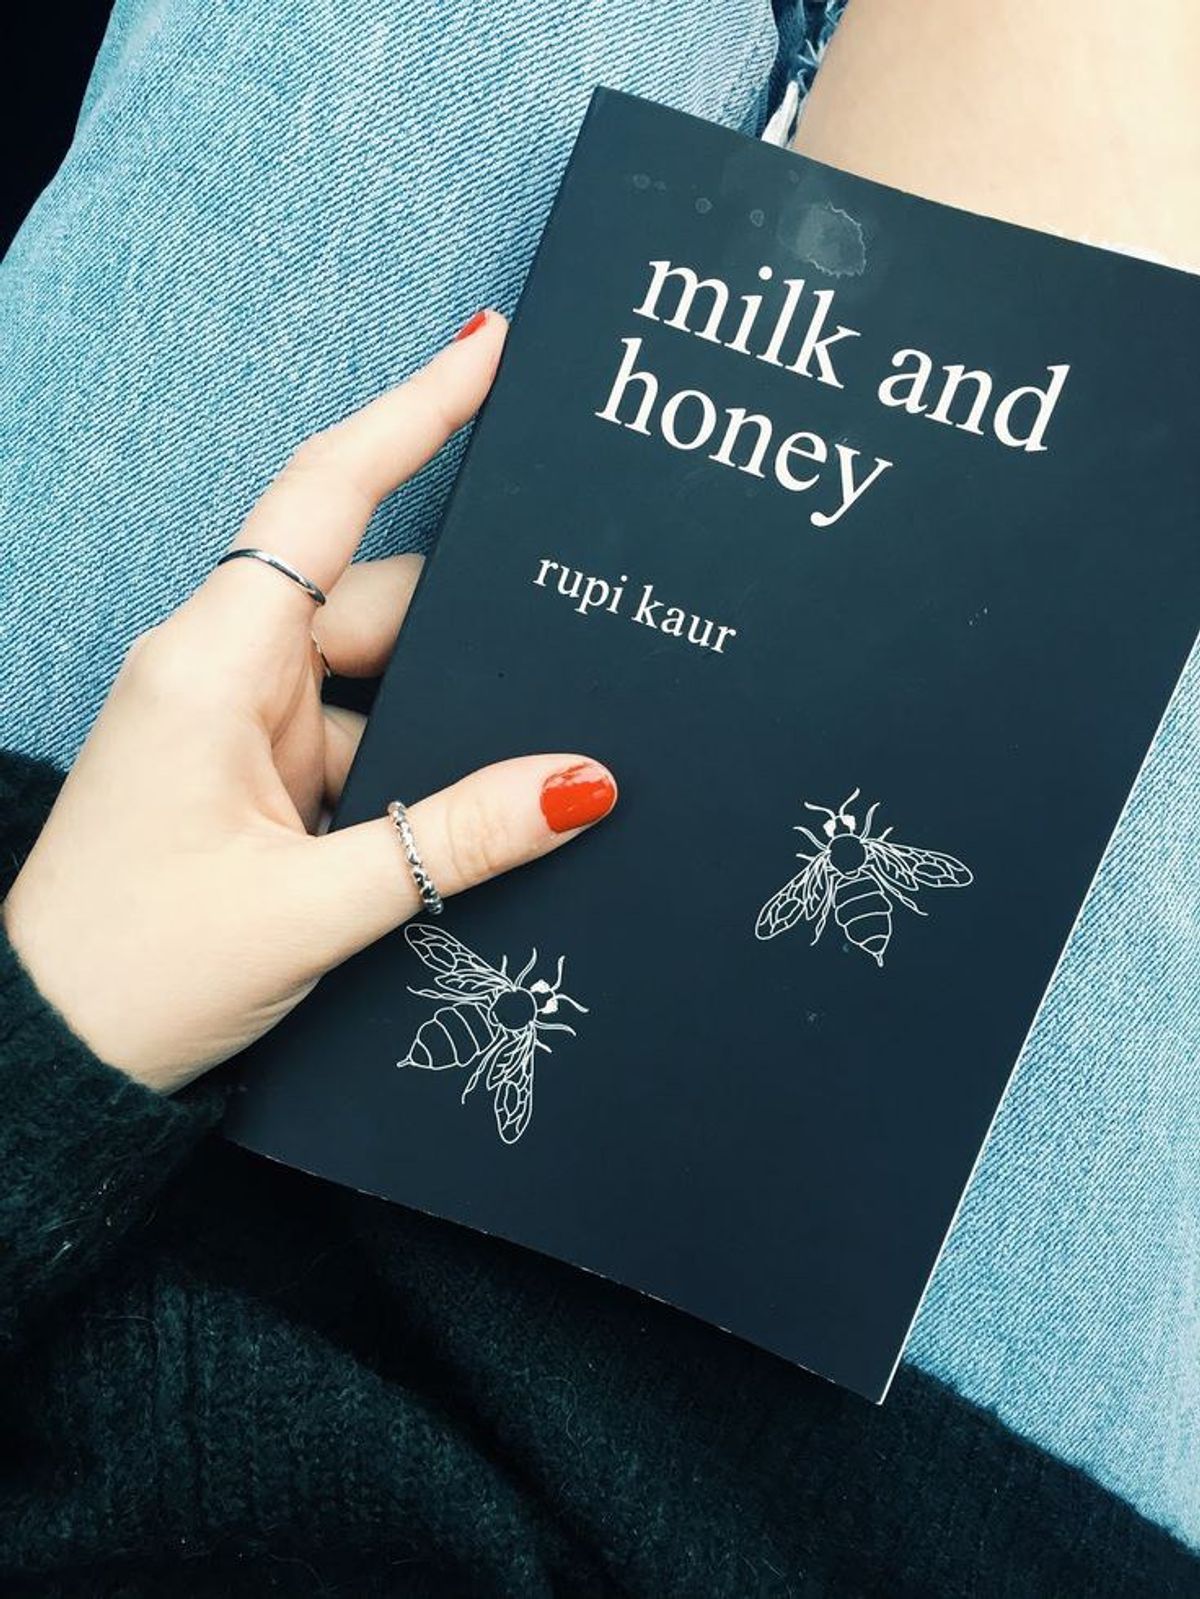 12 Empowering Quotes From Rupi Kaur's 'Milk And Honey'